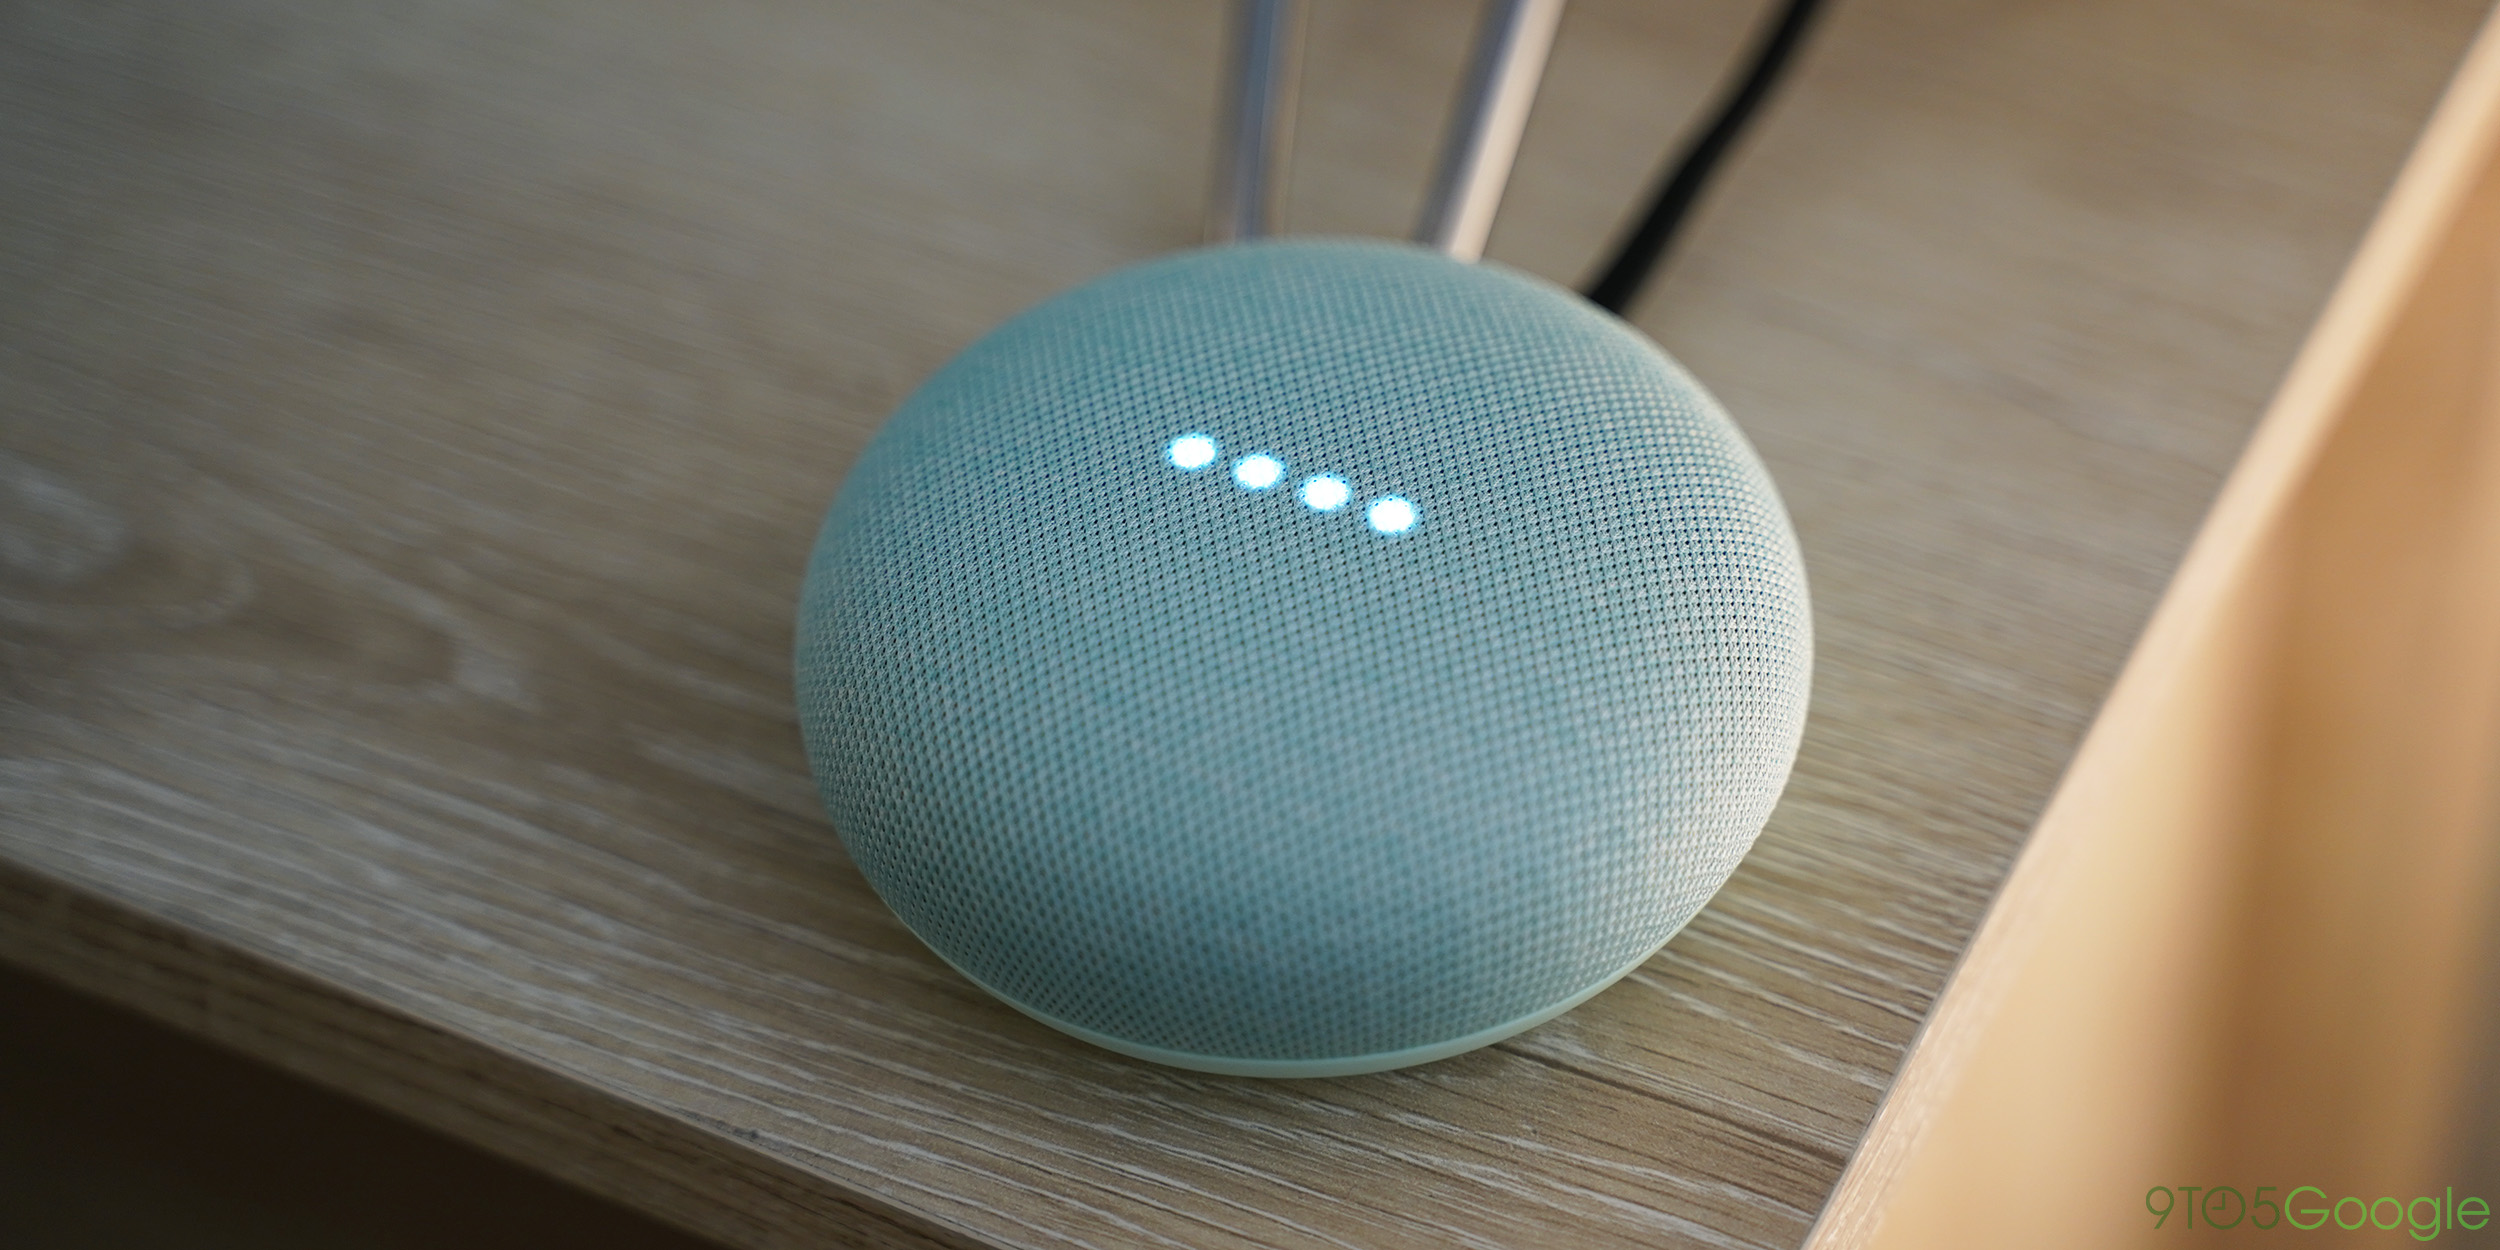 connecting ring to google home